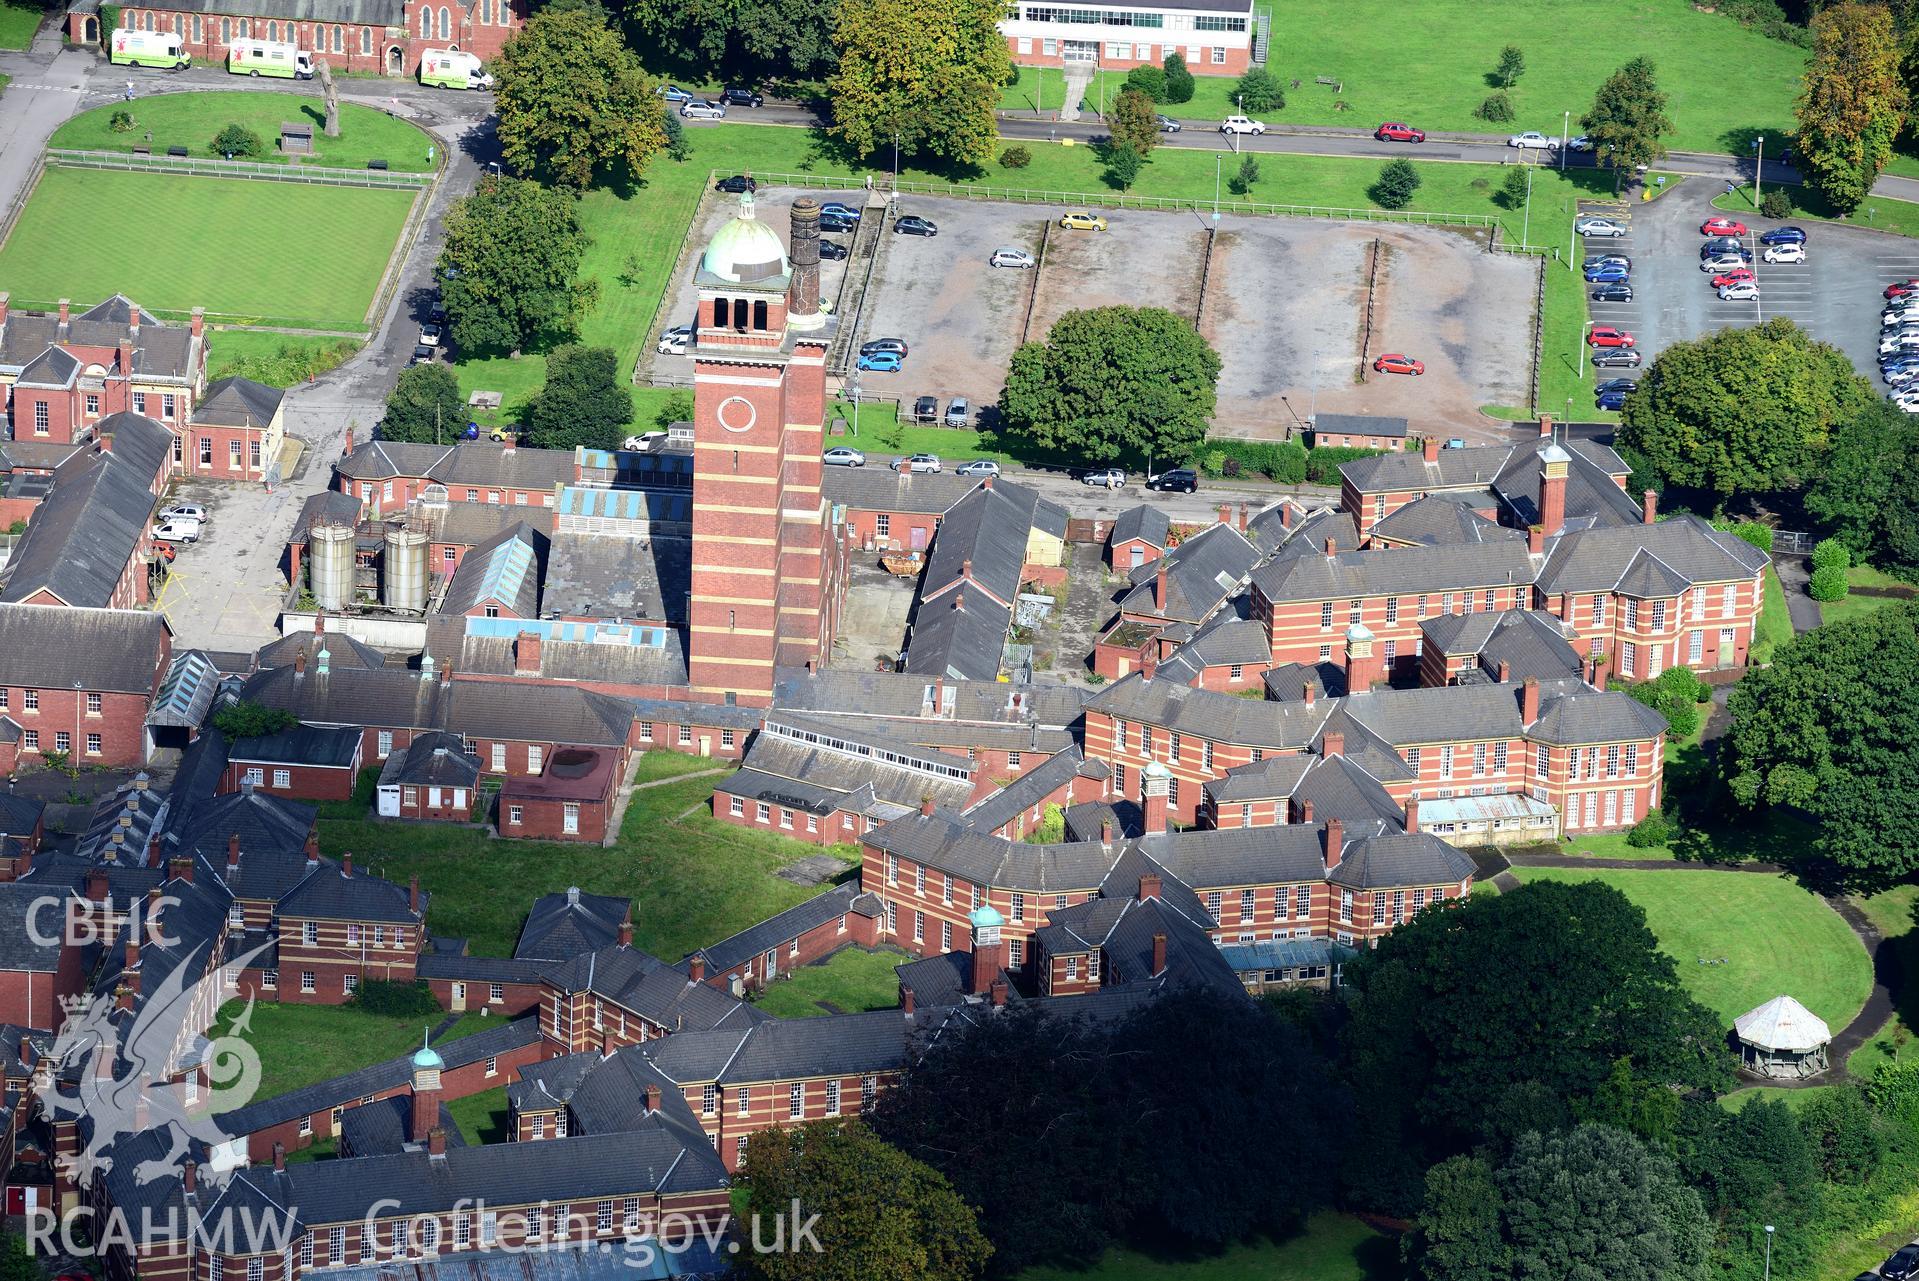 RCAHMW colour oblique aerial photograph of Whitchurch Hospital, taken by RCAHMW 26th August 2016.